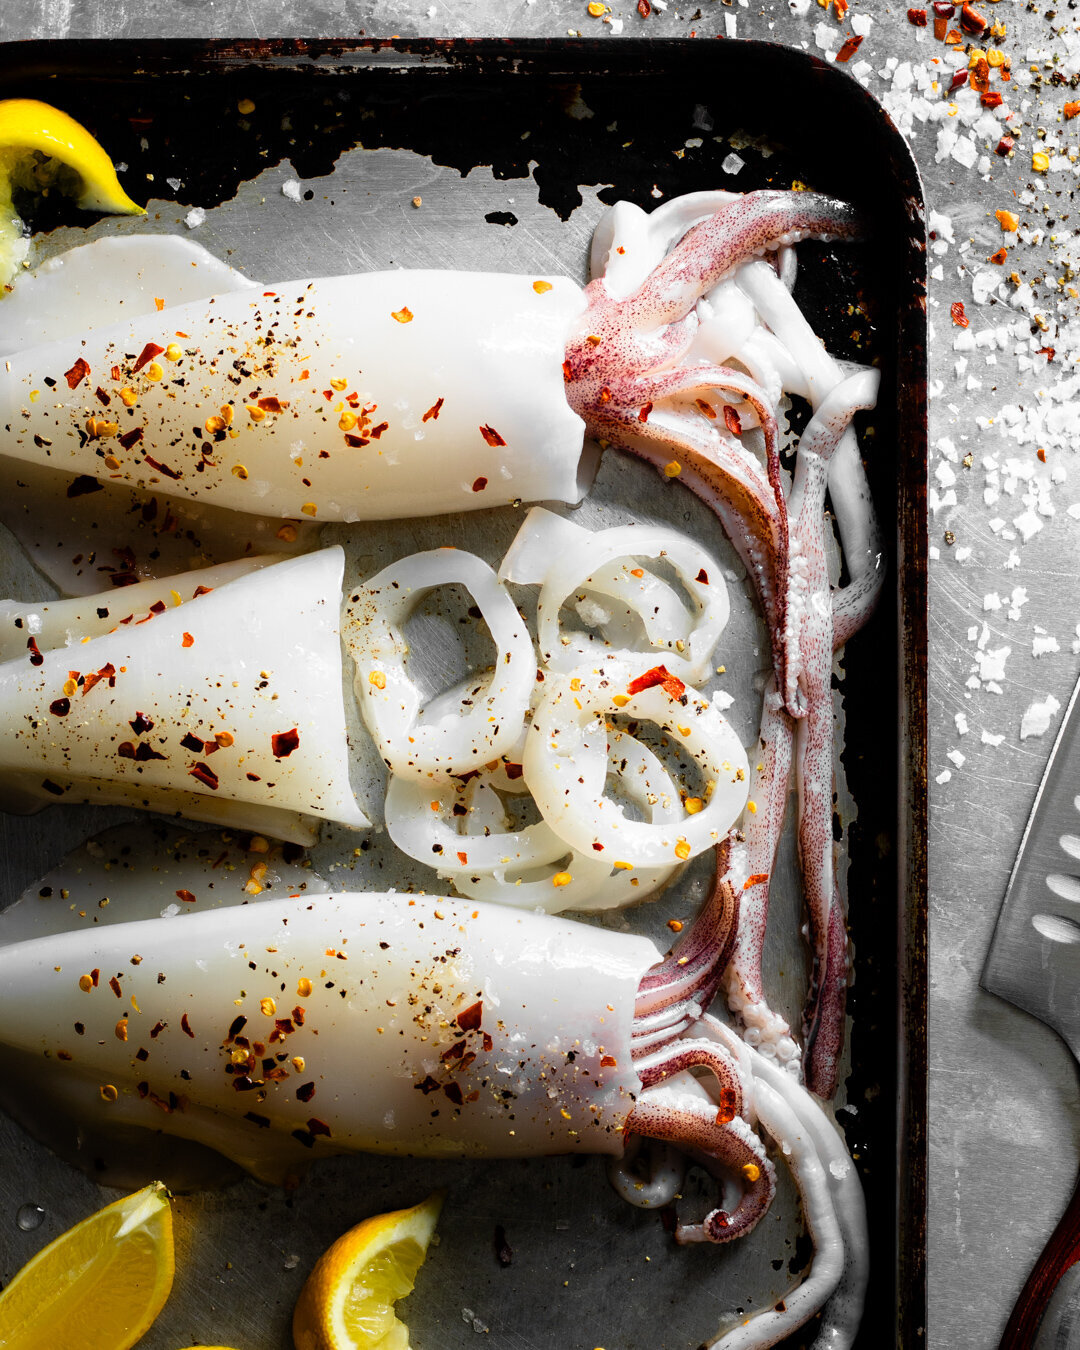 Raw squid on a tray with seasoning and lemon wedges